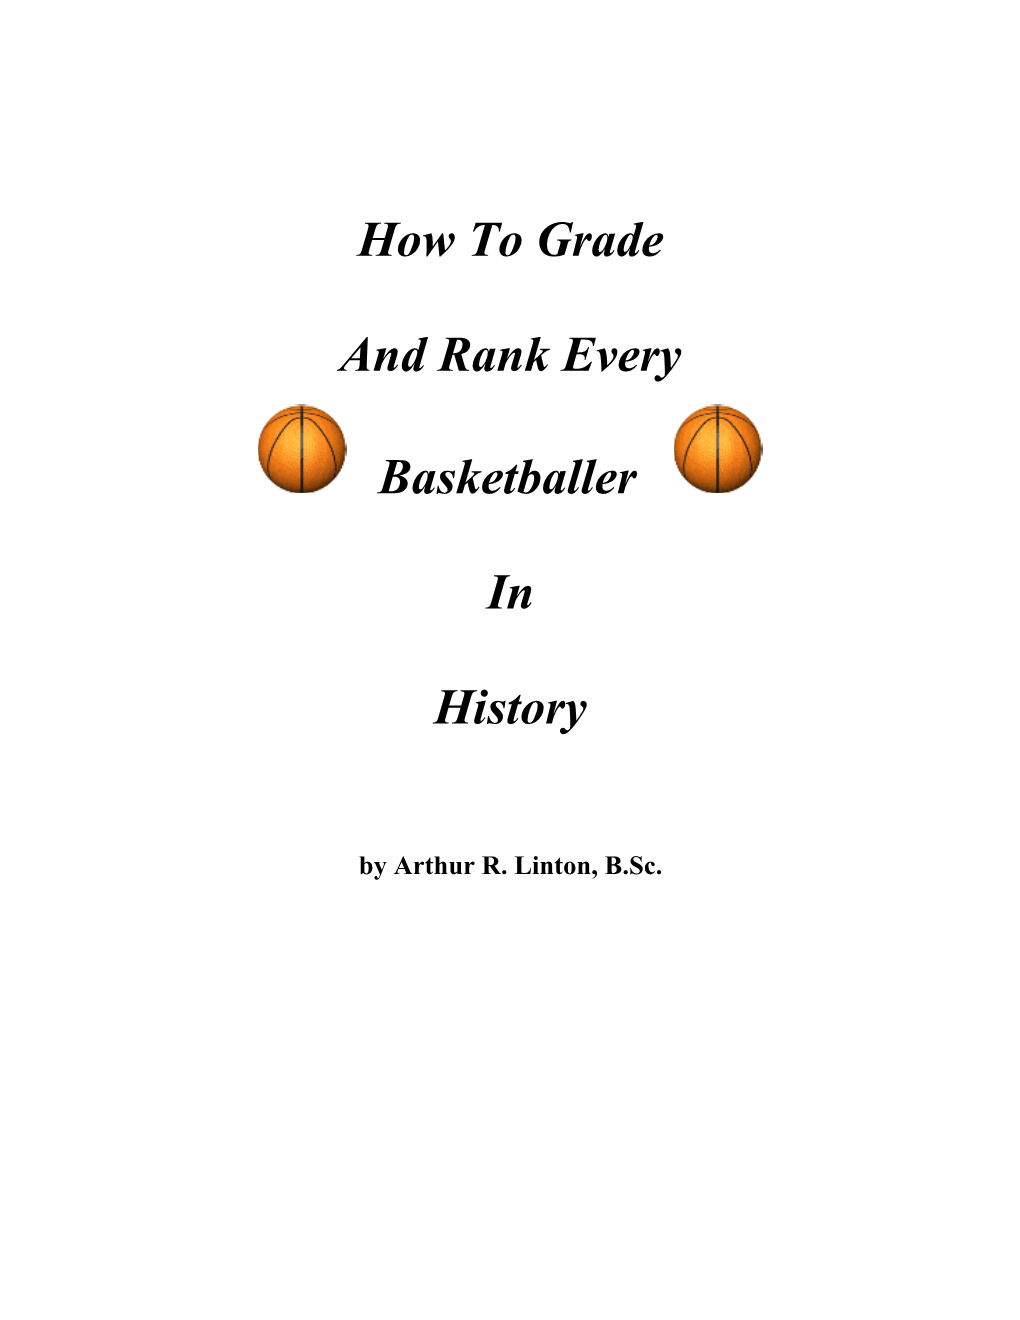 How to Grade and Rank Every Basketballer In